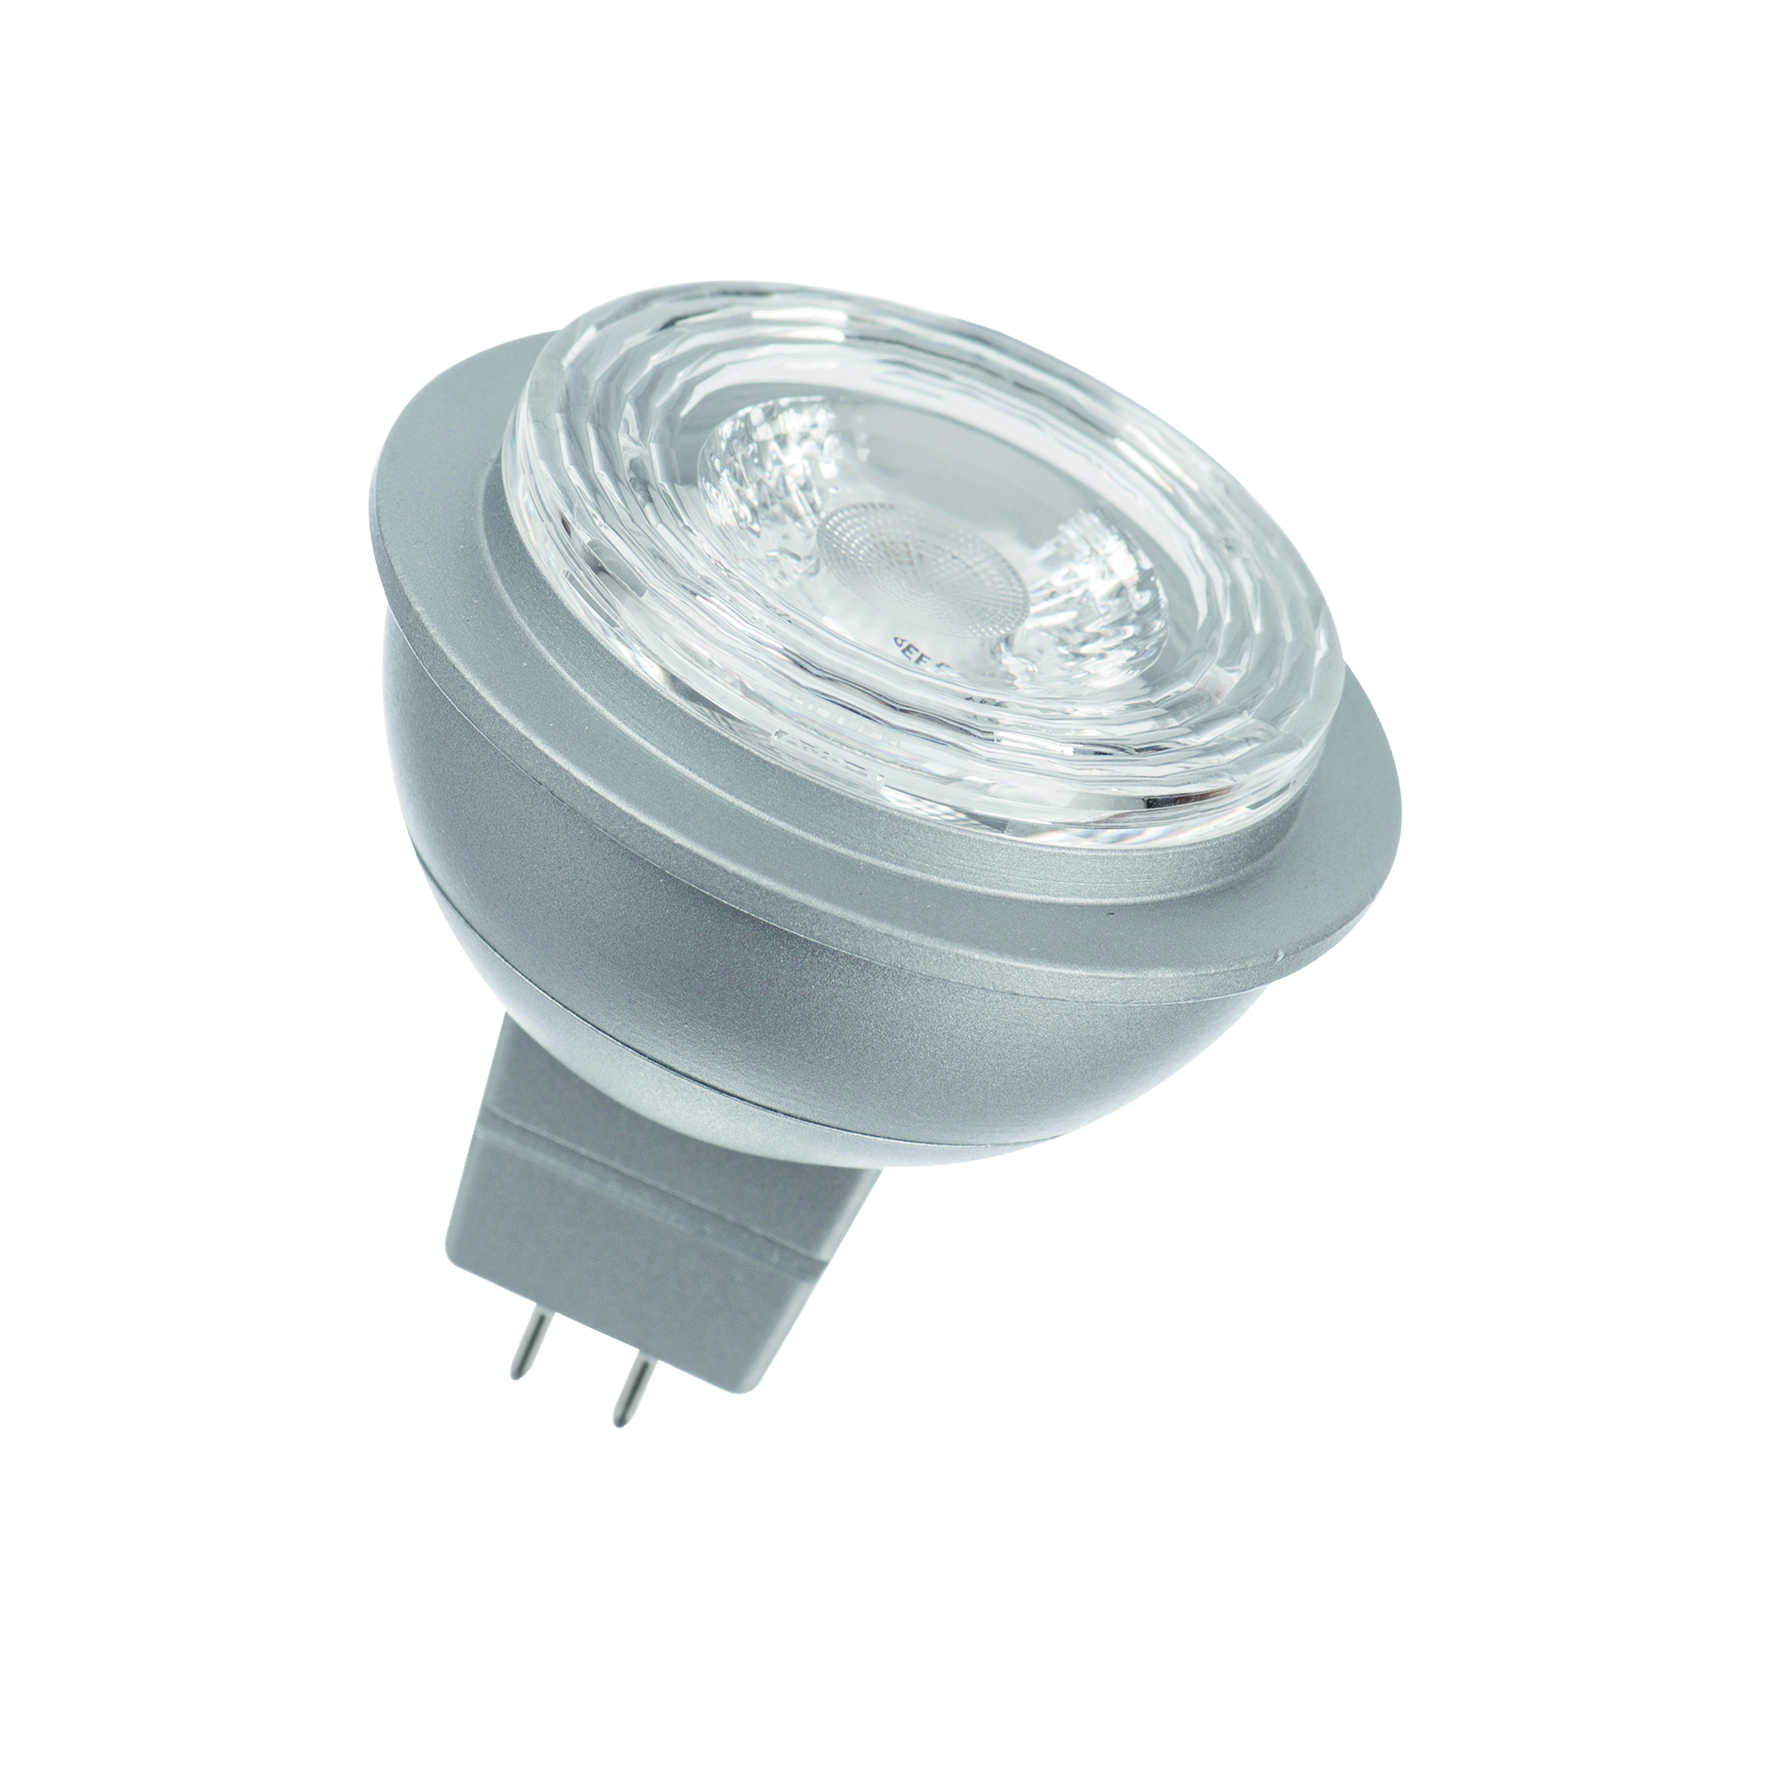 LED MR16 GU5.3 7W/827 35D Dimmable